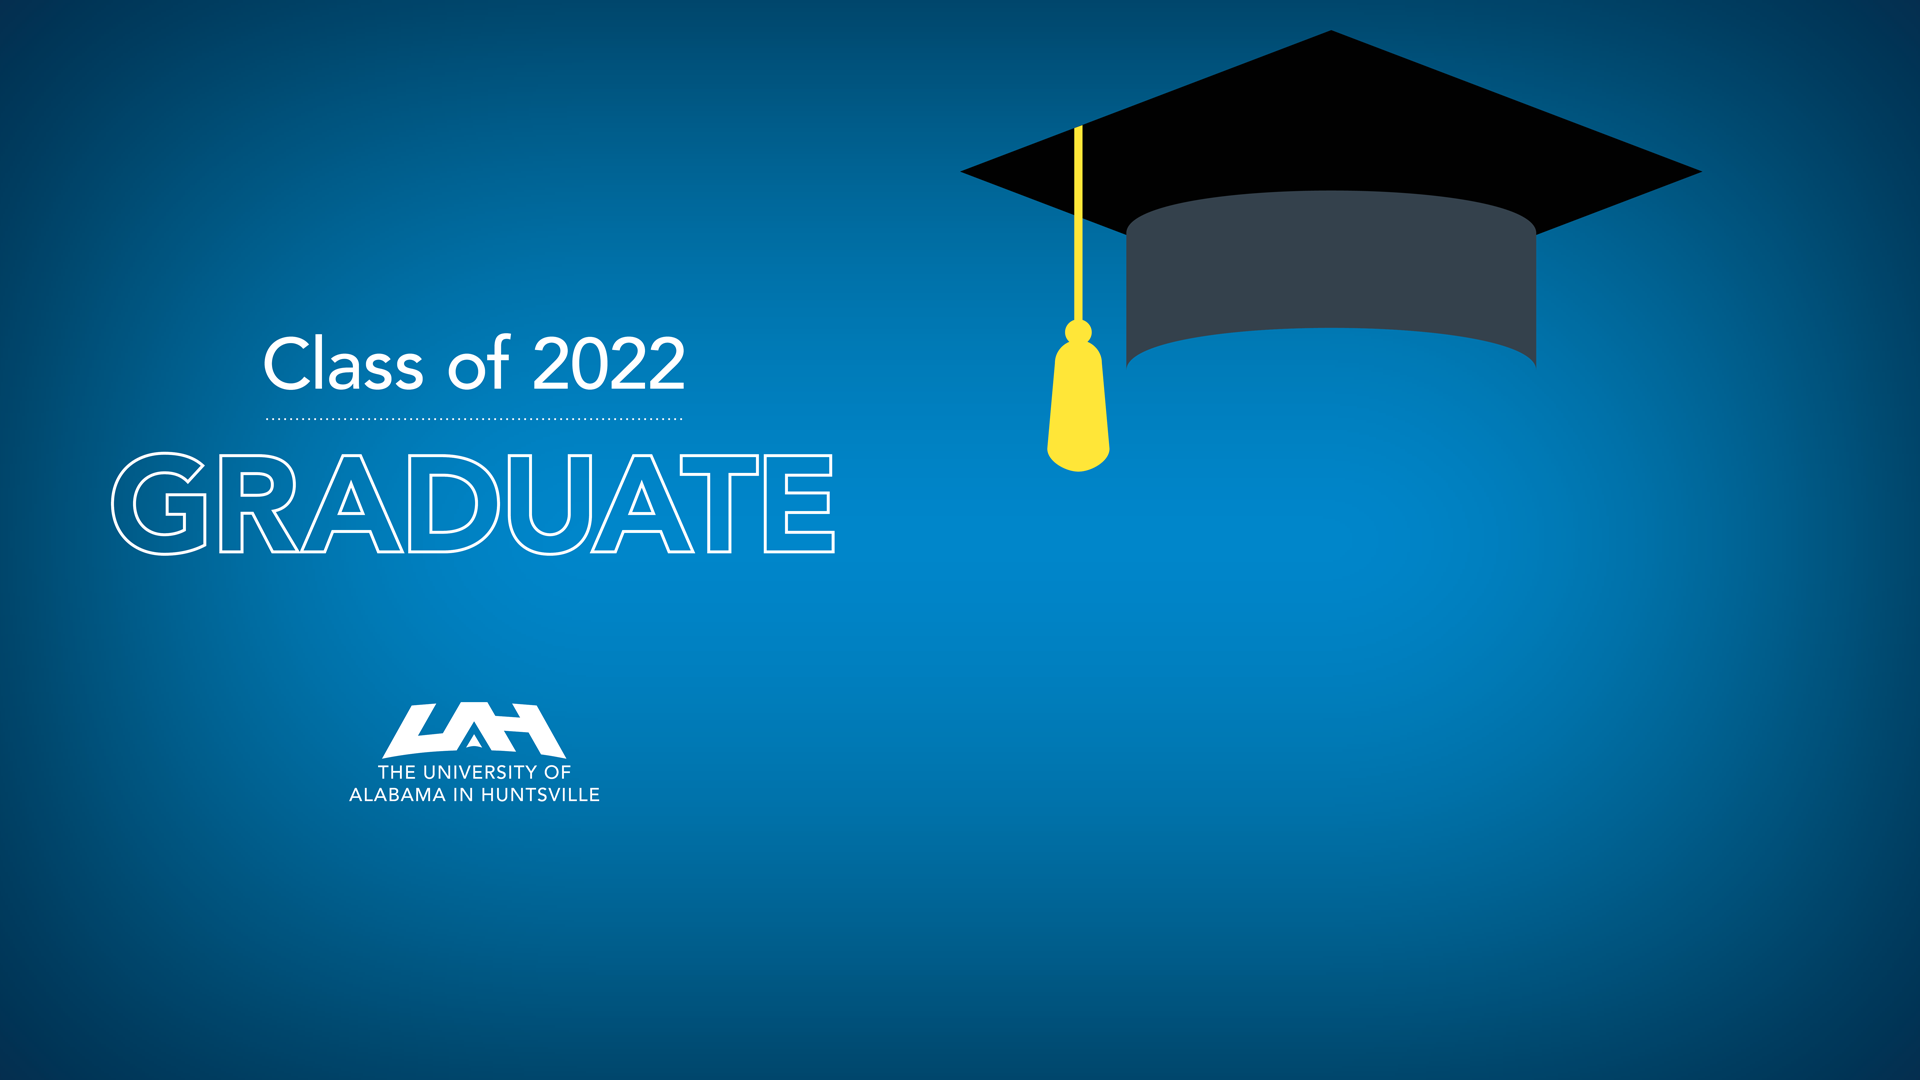 UAH logo and graduation cap on a blue background